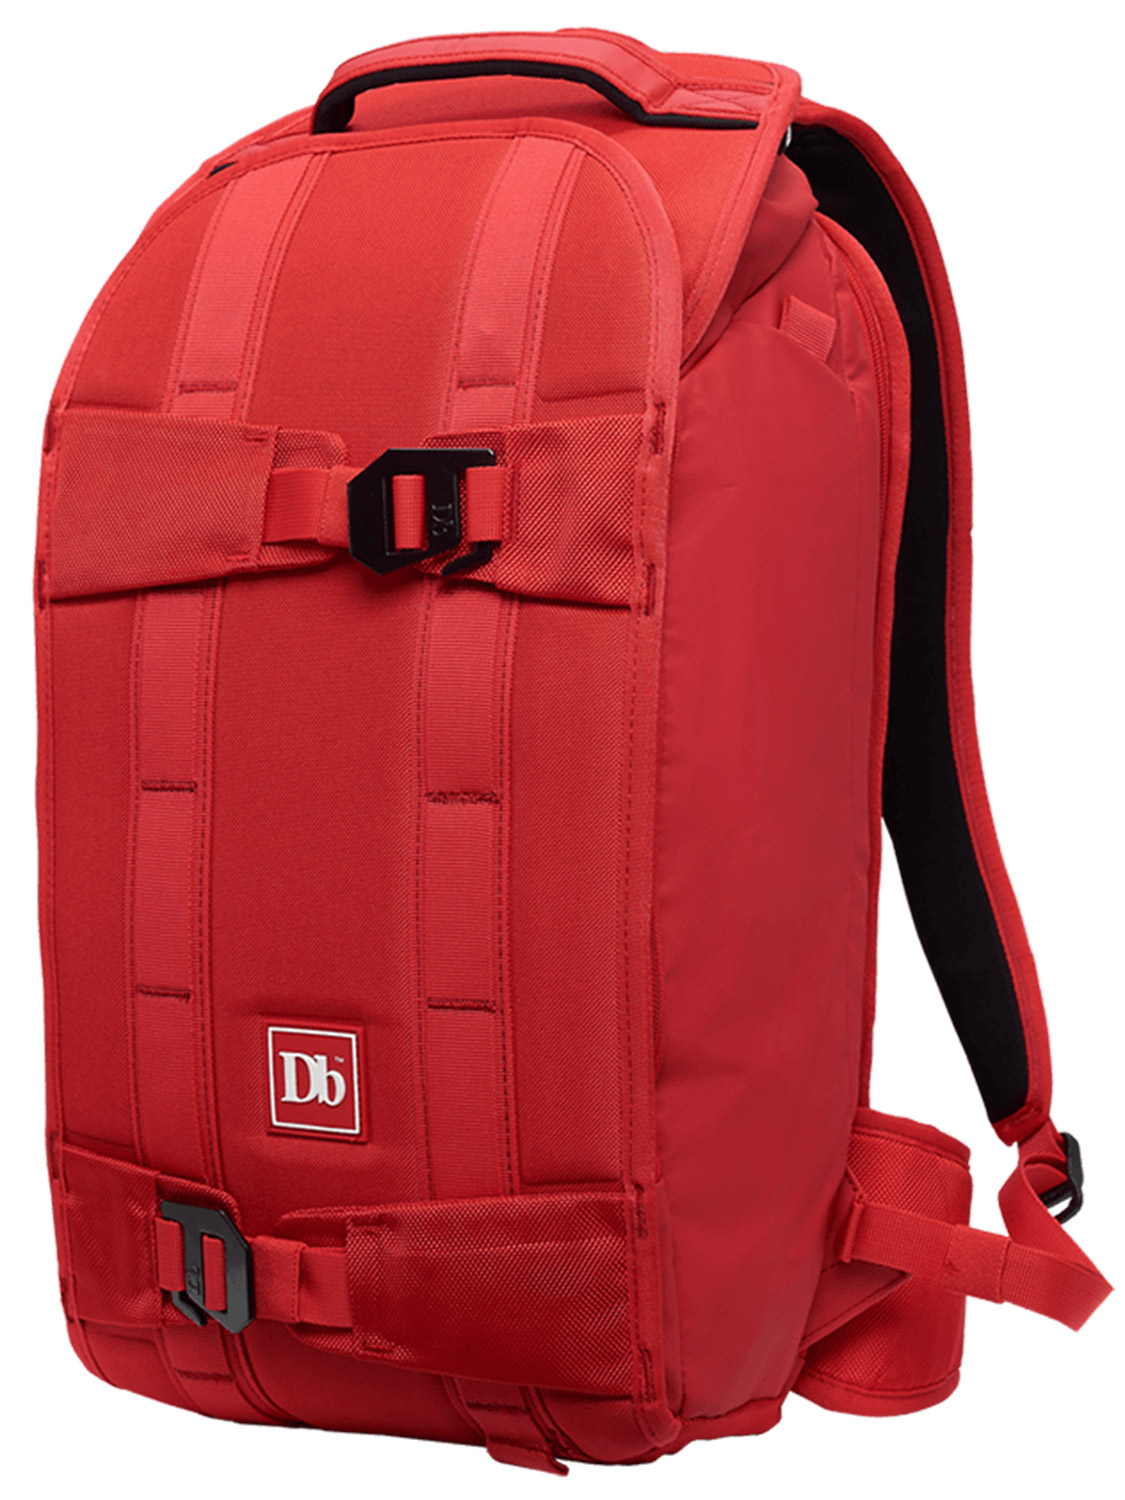 Douche Bag The Explorer Red - Size: ONE